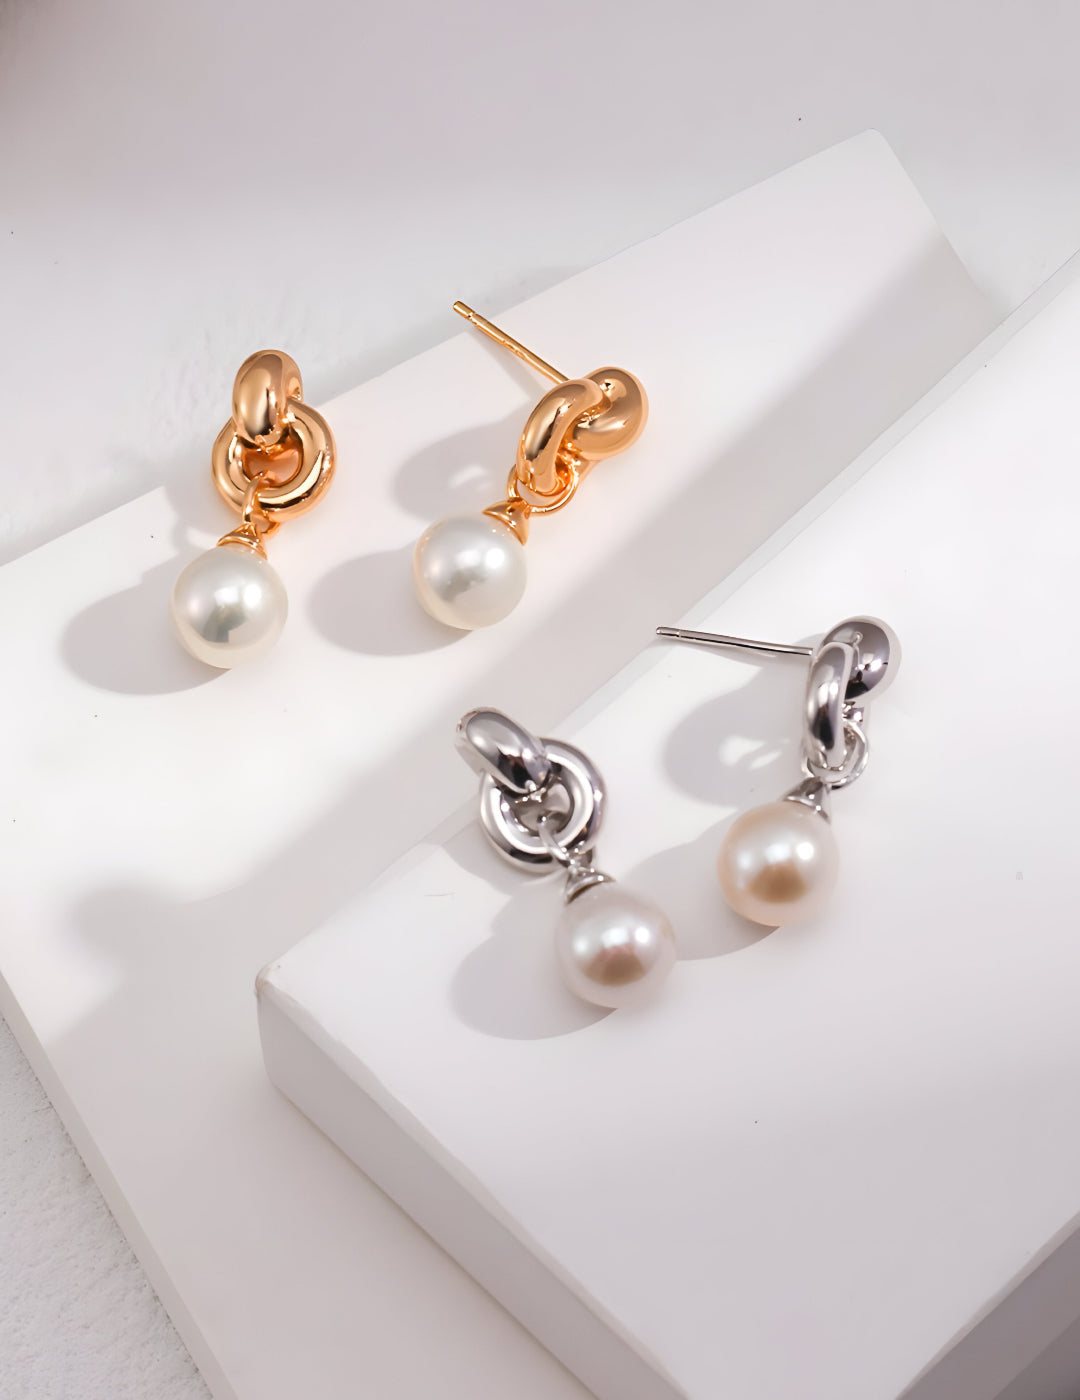  Intertwined Elegance Pearl Earrings - S925 Sterling Silver with 18K Gold Vermeil- Pearl Luminance - Experience the benefits of these exquisite earrings - elegance, durability, and a radiant glow - Let your inner beauty shine through